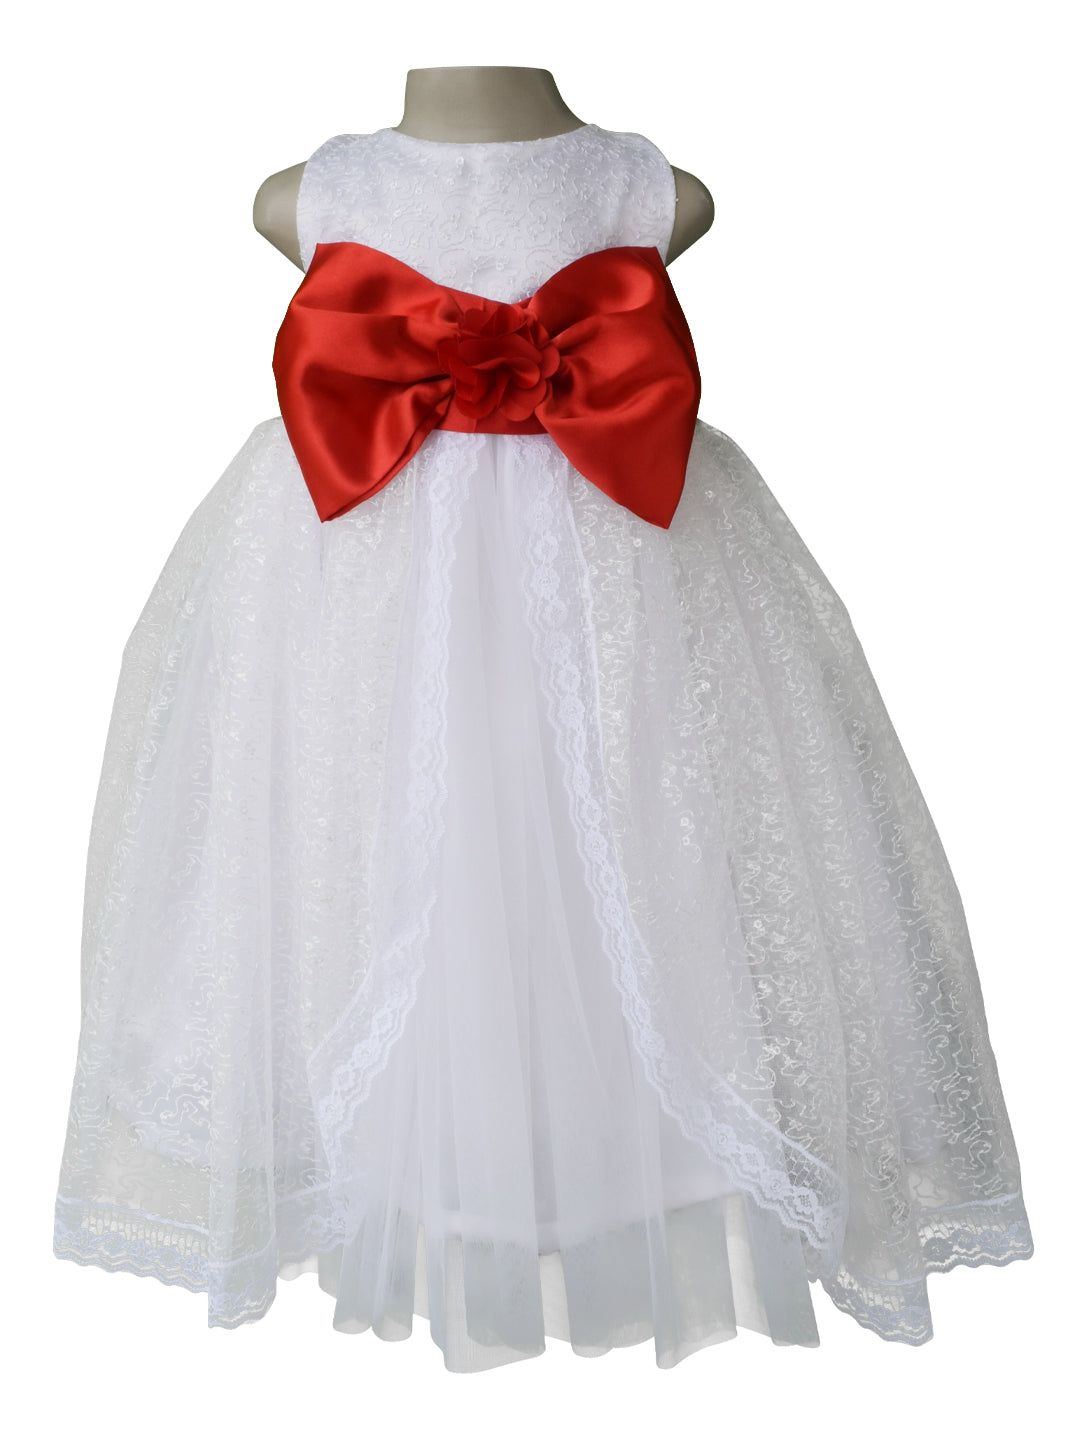 Buy LZH Flower Girl Dress Baby Toddlers Sequin Dress Tutu Kids Party Dress  Bridesmaid Wedding Gown Wine Red at Amazon.in